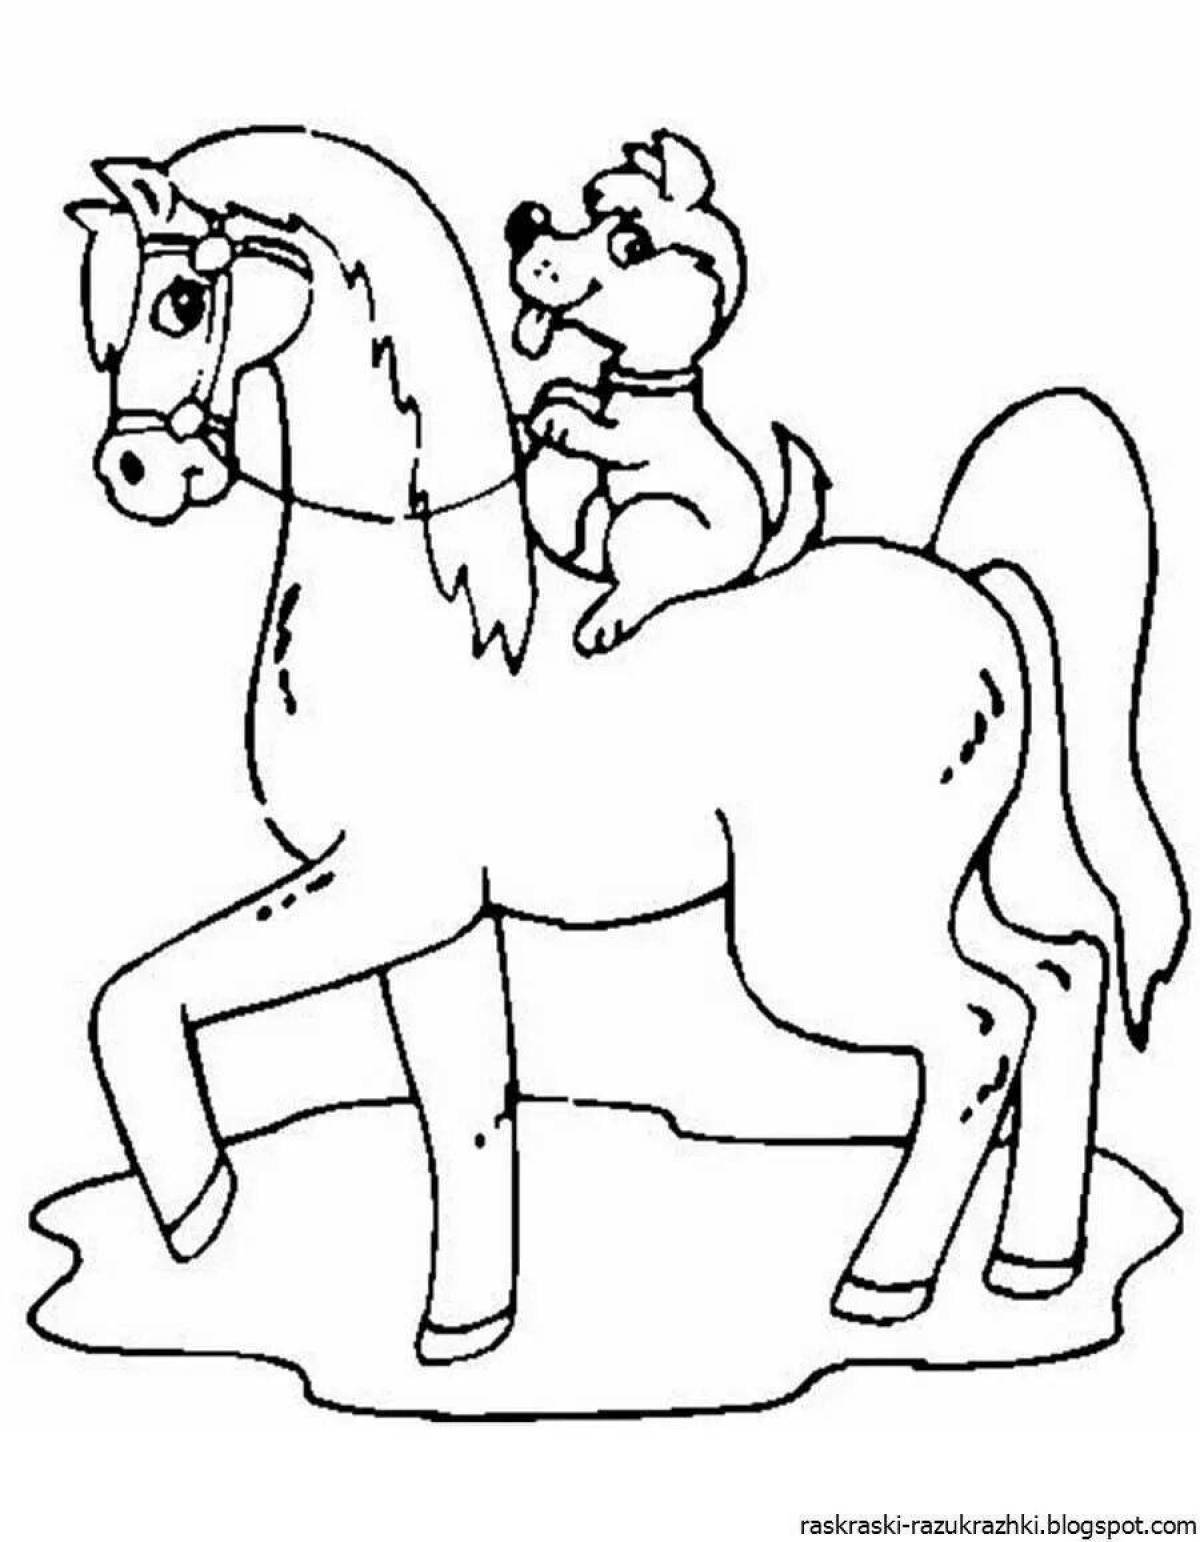 Colorful horse coloring page